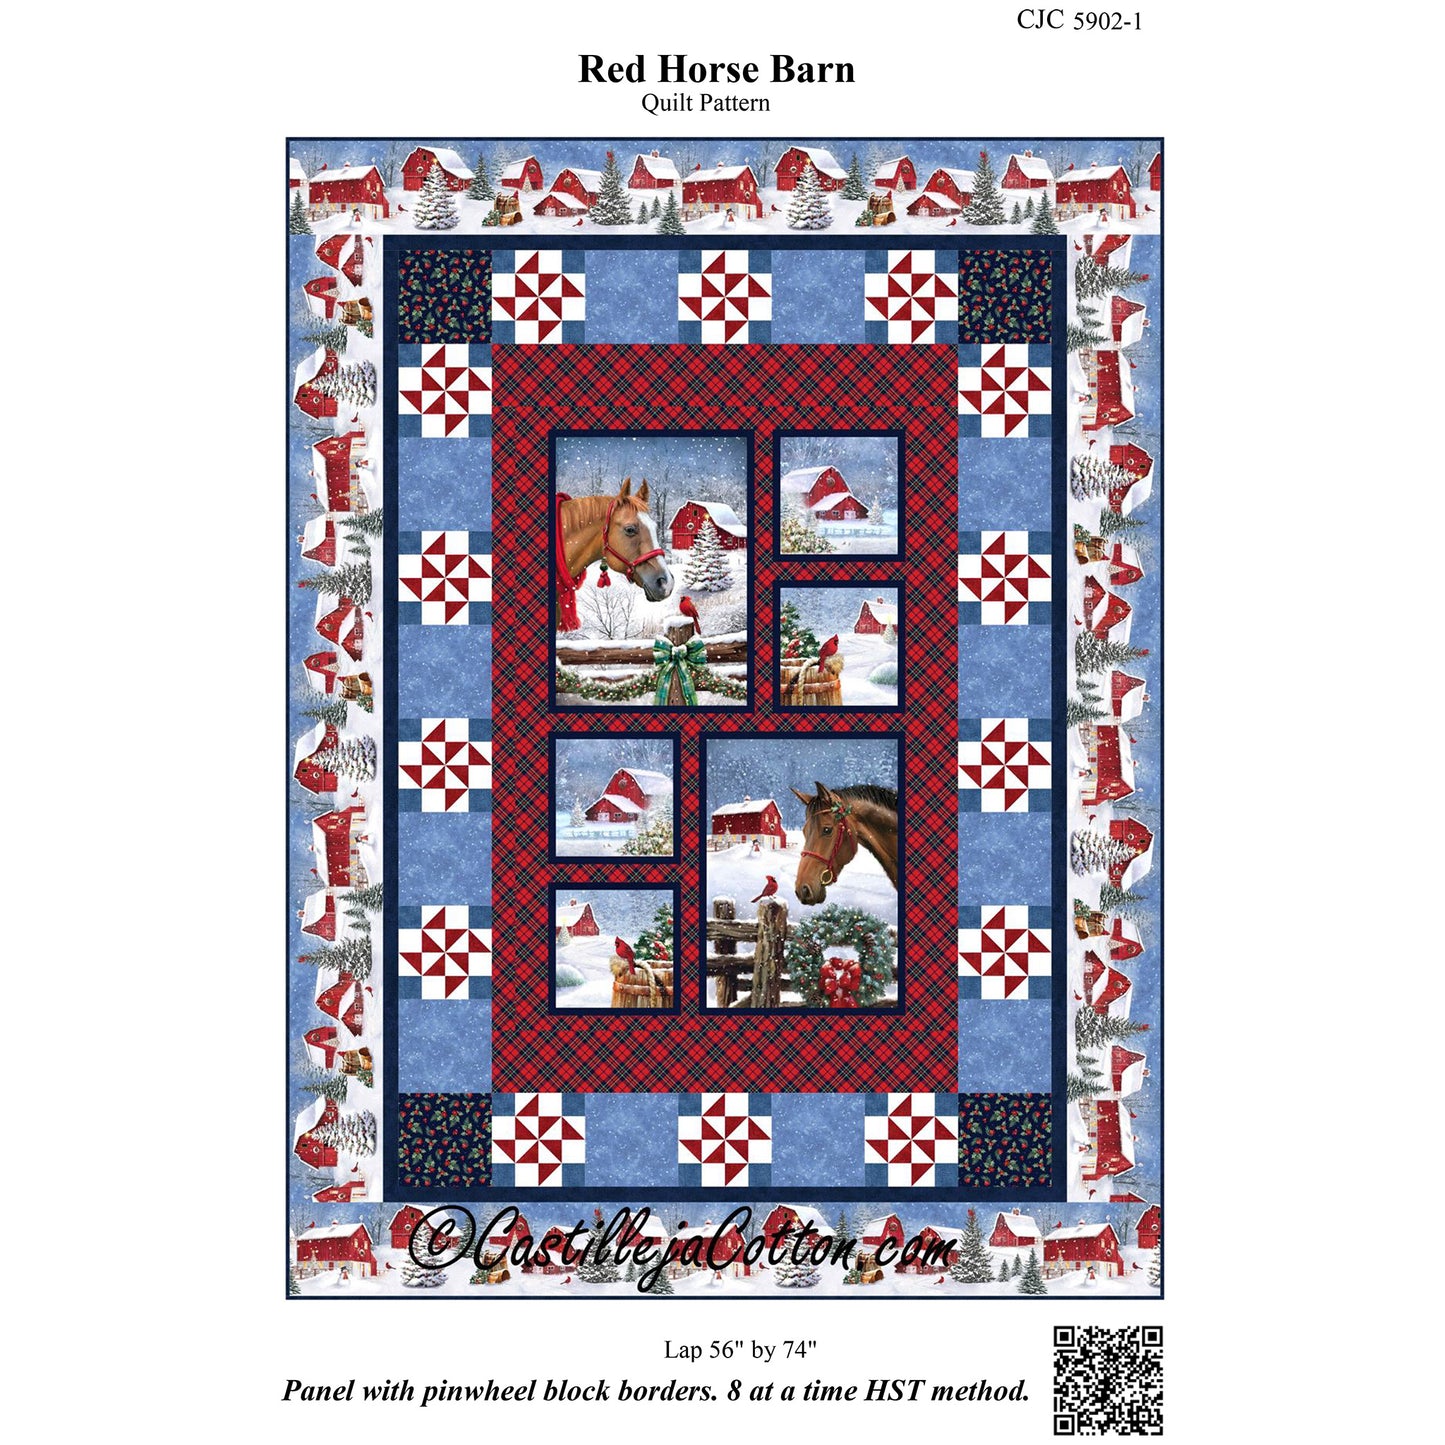 Cover image of pattern for Red Horse Barn Quilt.